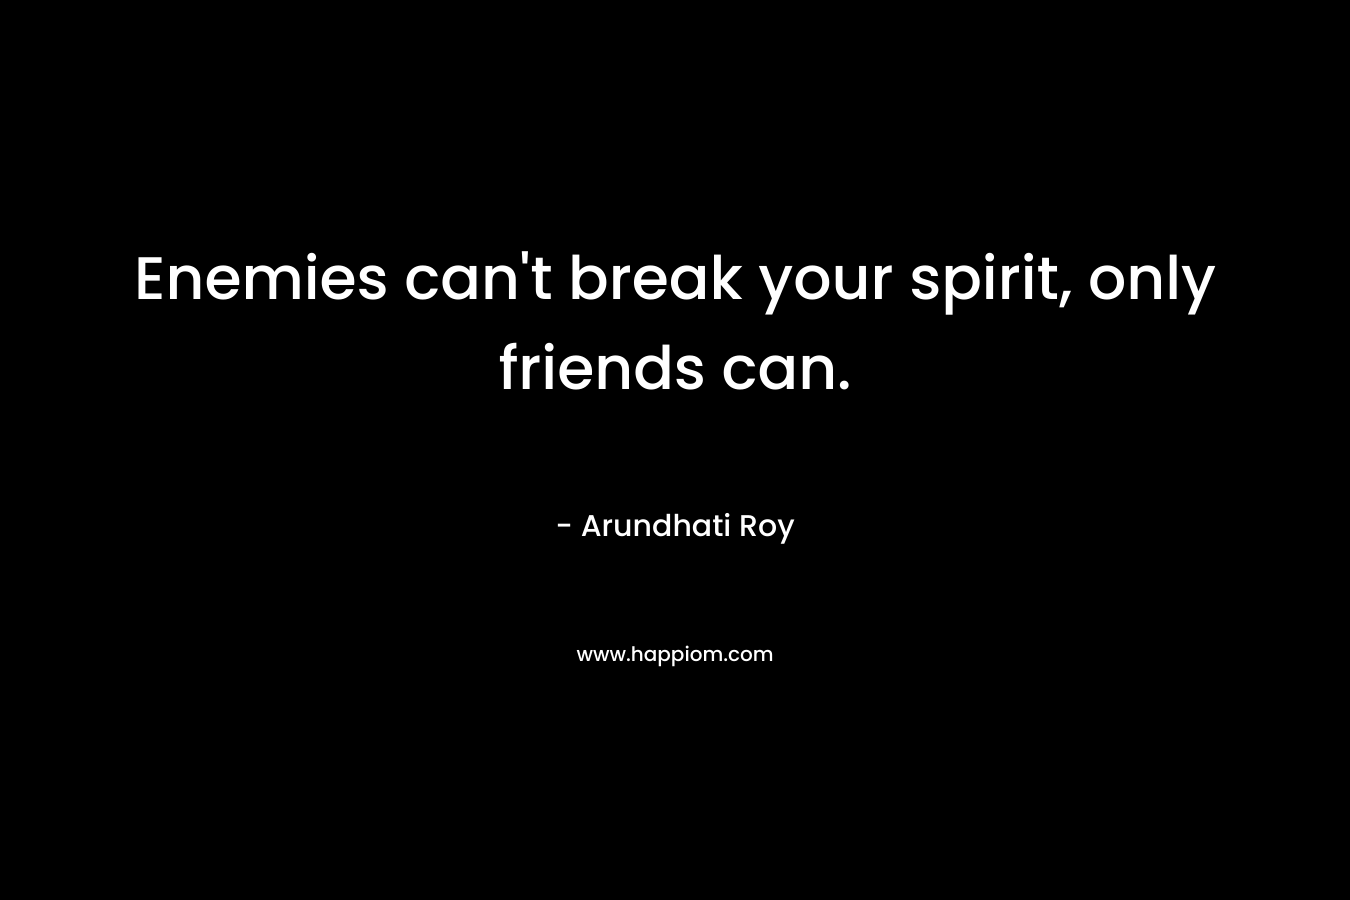 Enemies can't break your spirit, only friends can.